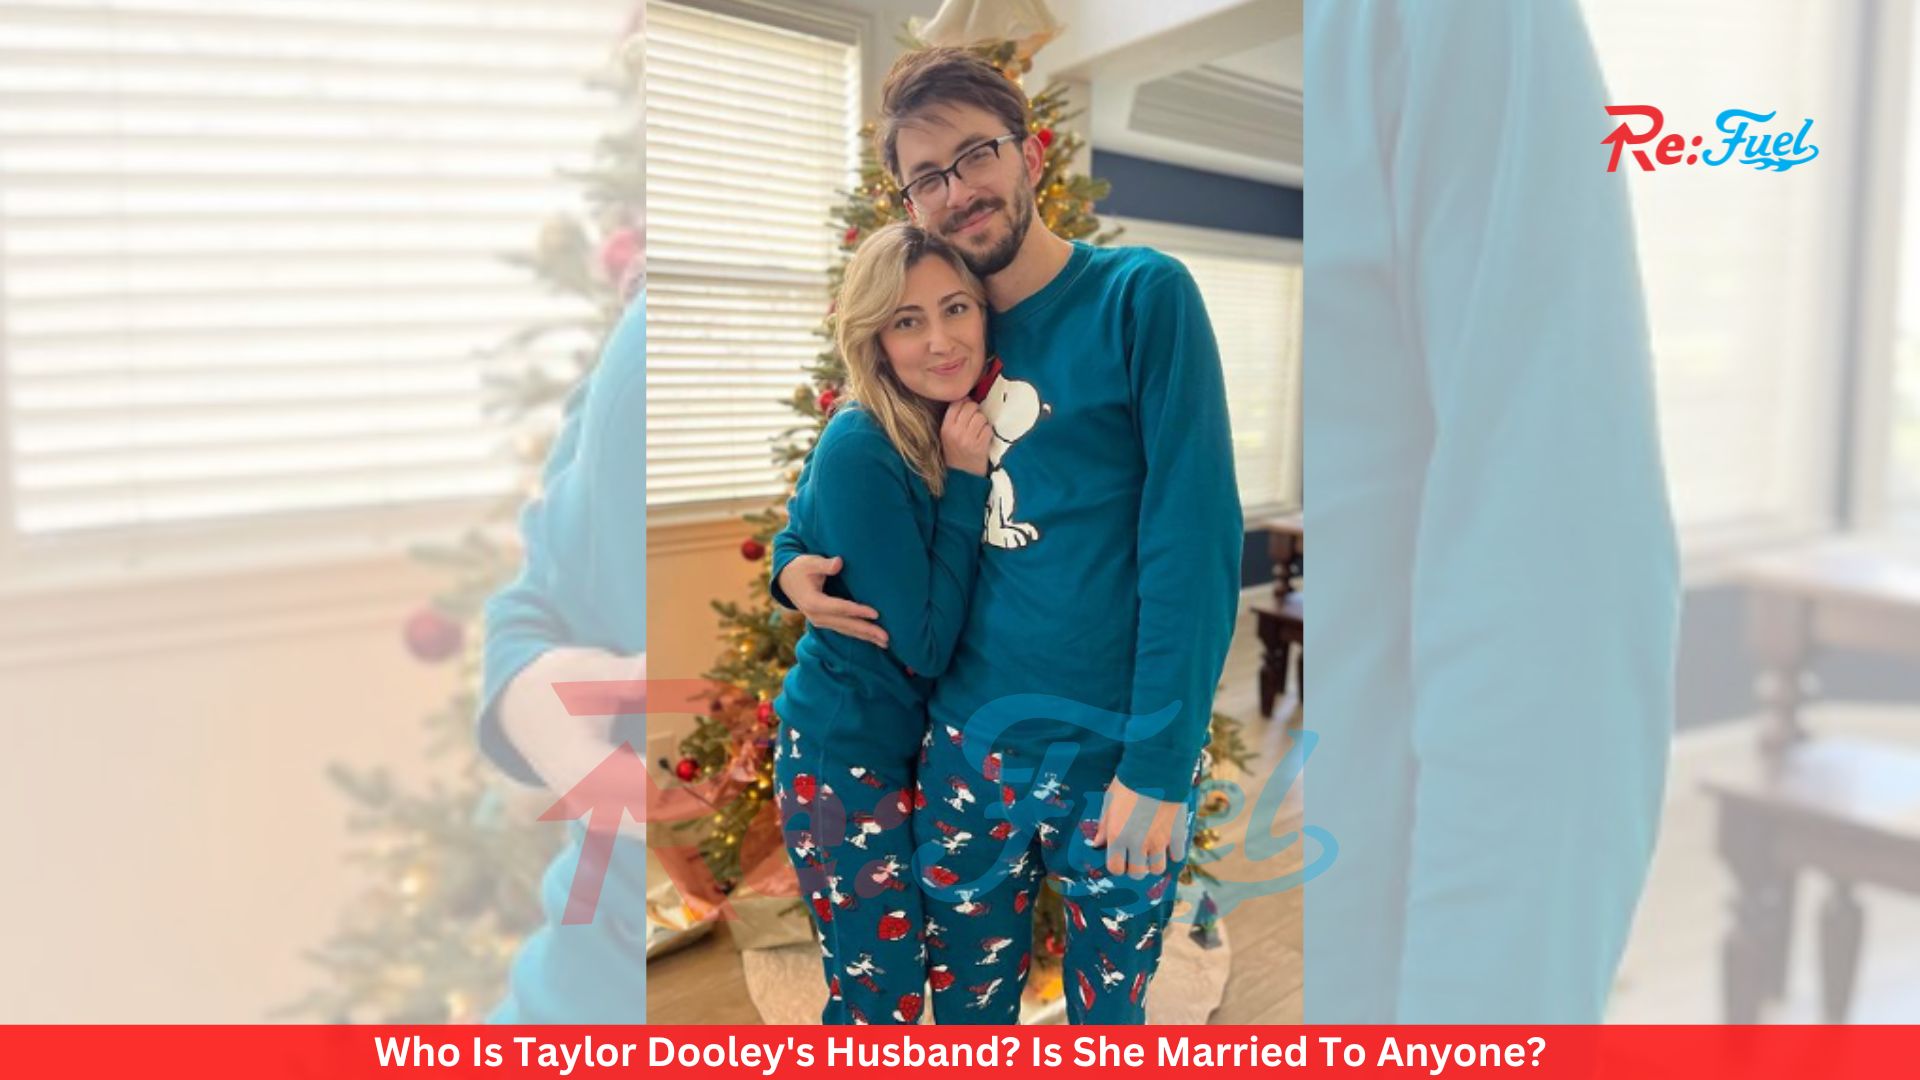 Who Is Taylor Dooley's Husband? Is She Married To Anyone?